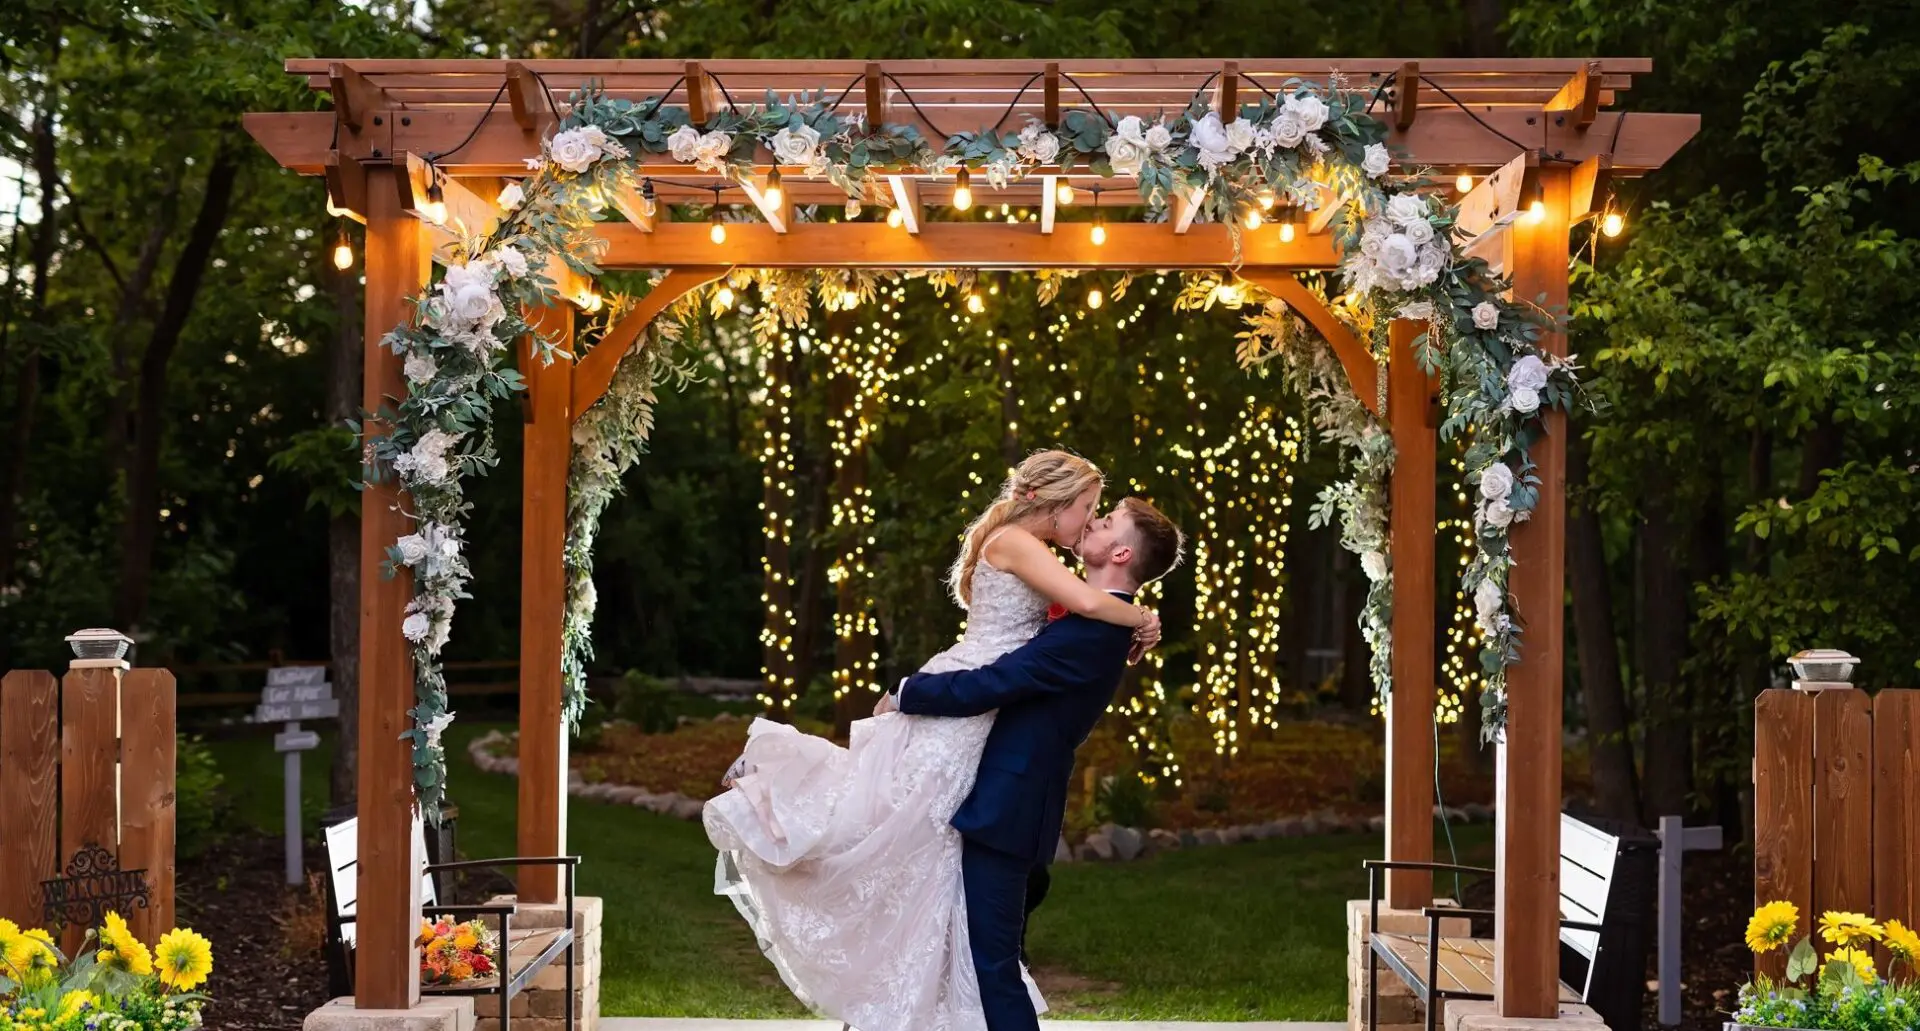 A bride and groom are dancing under the arbor.